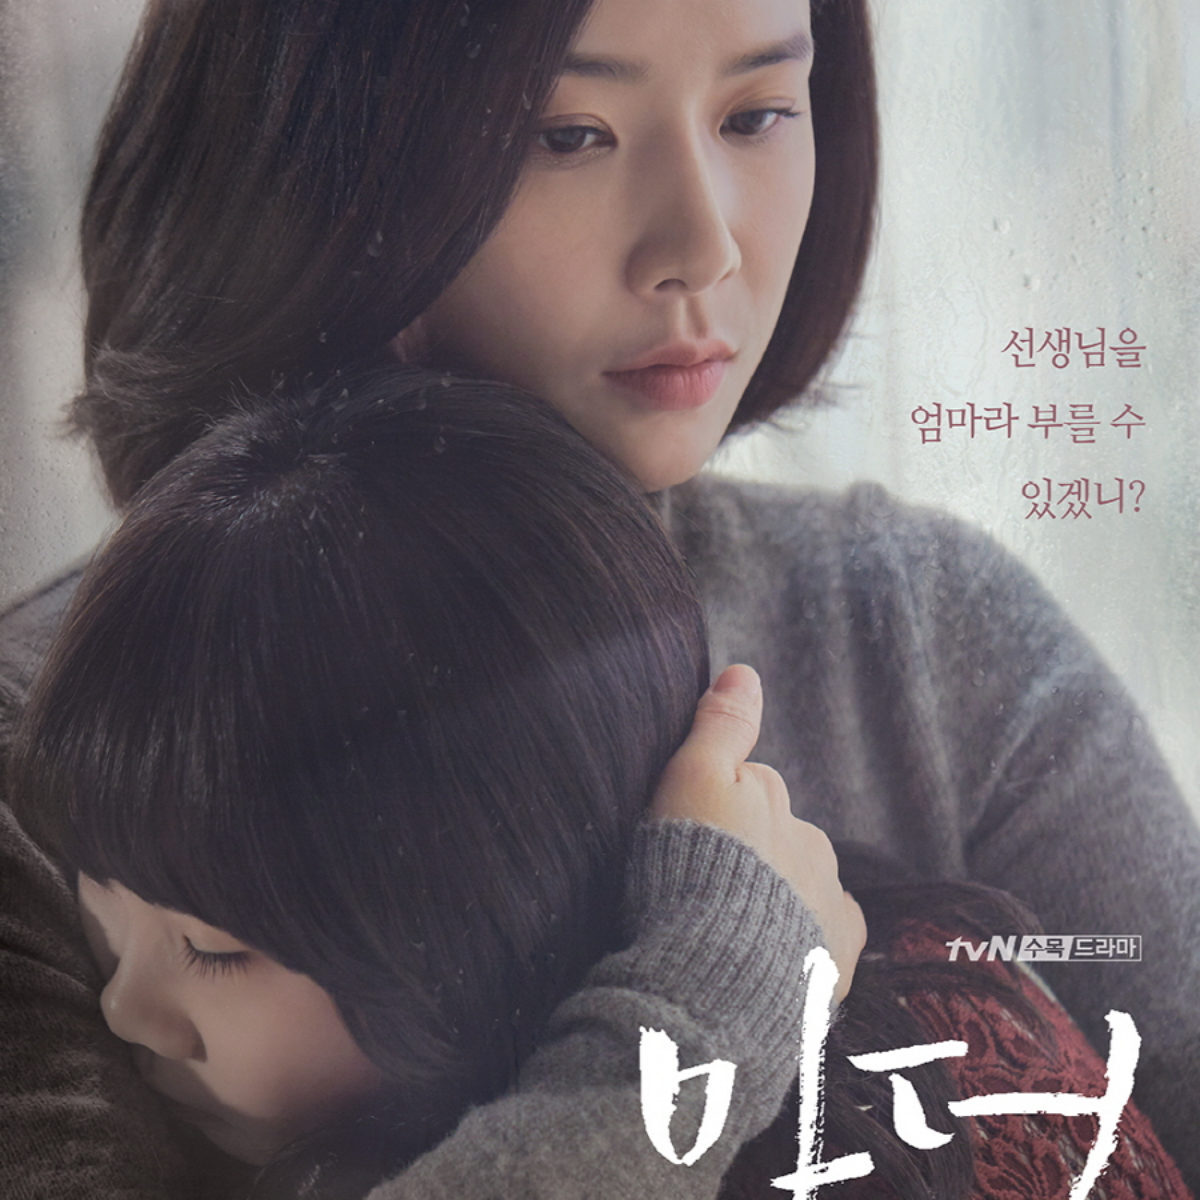 mother kdrama 11